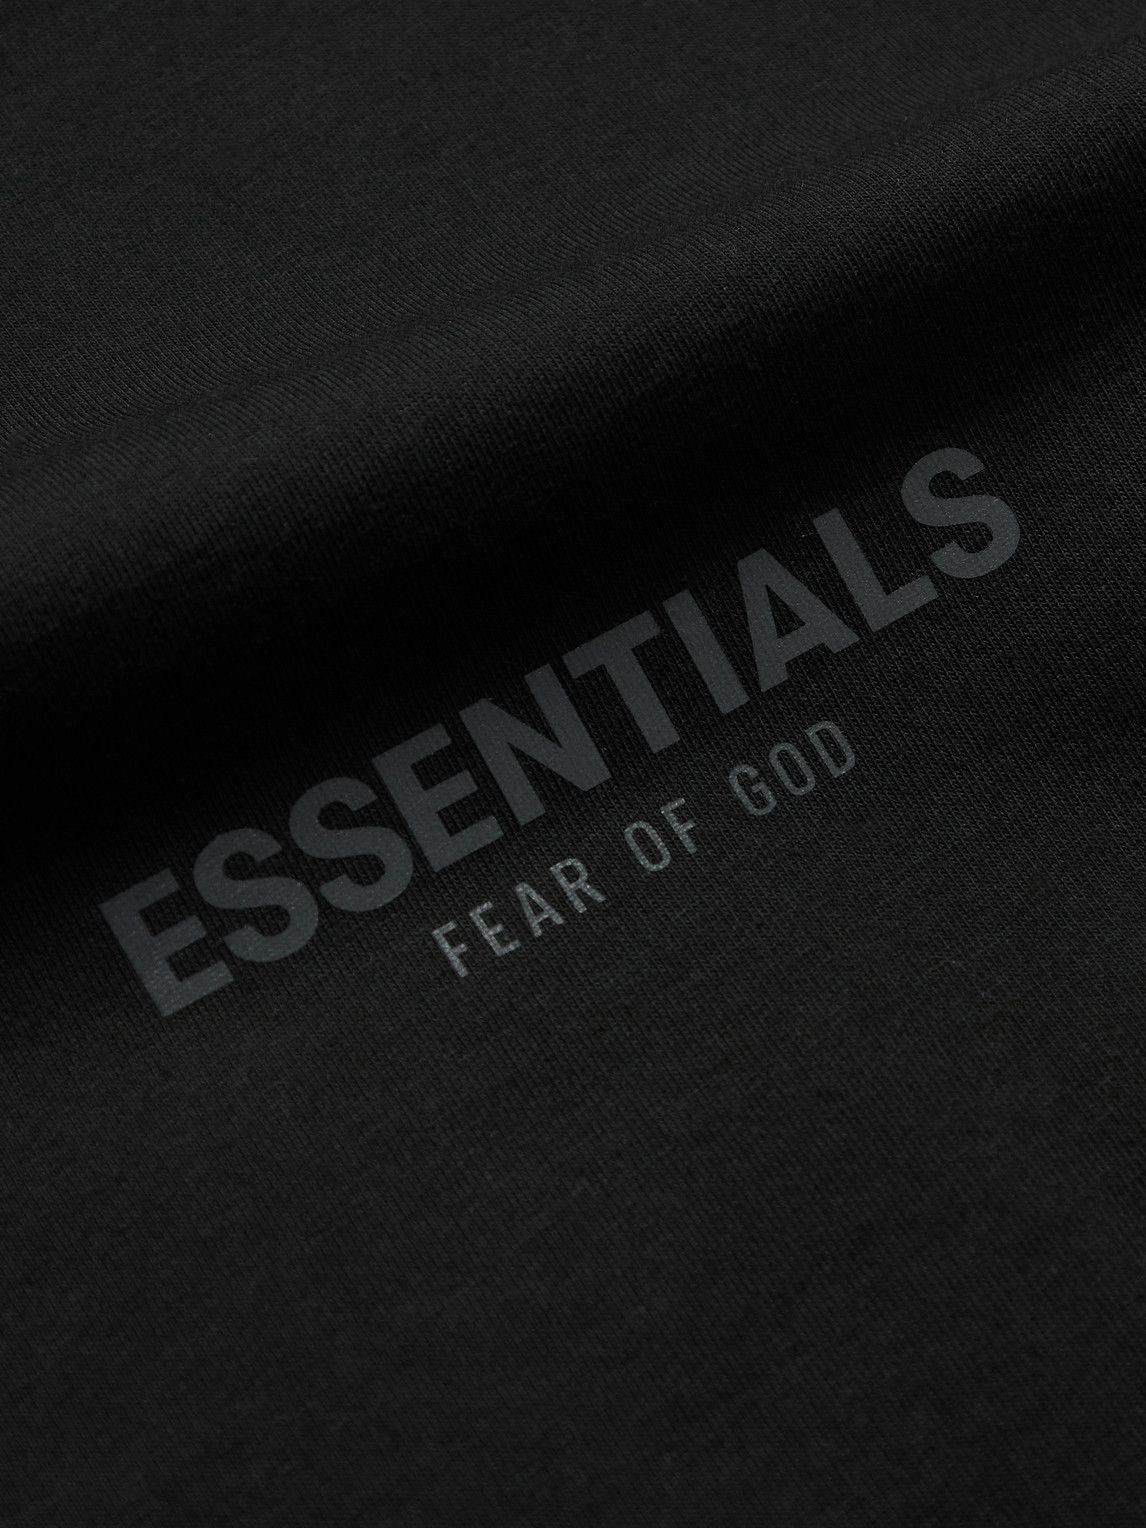 Fear of God ESSENTIALS Returns With Photo Series Collection  PAUSE Online   Mens Fashion Street Style Fashion News  Streetwear